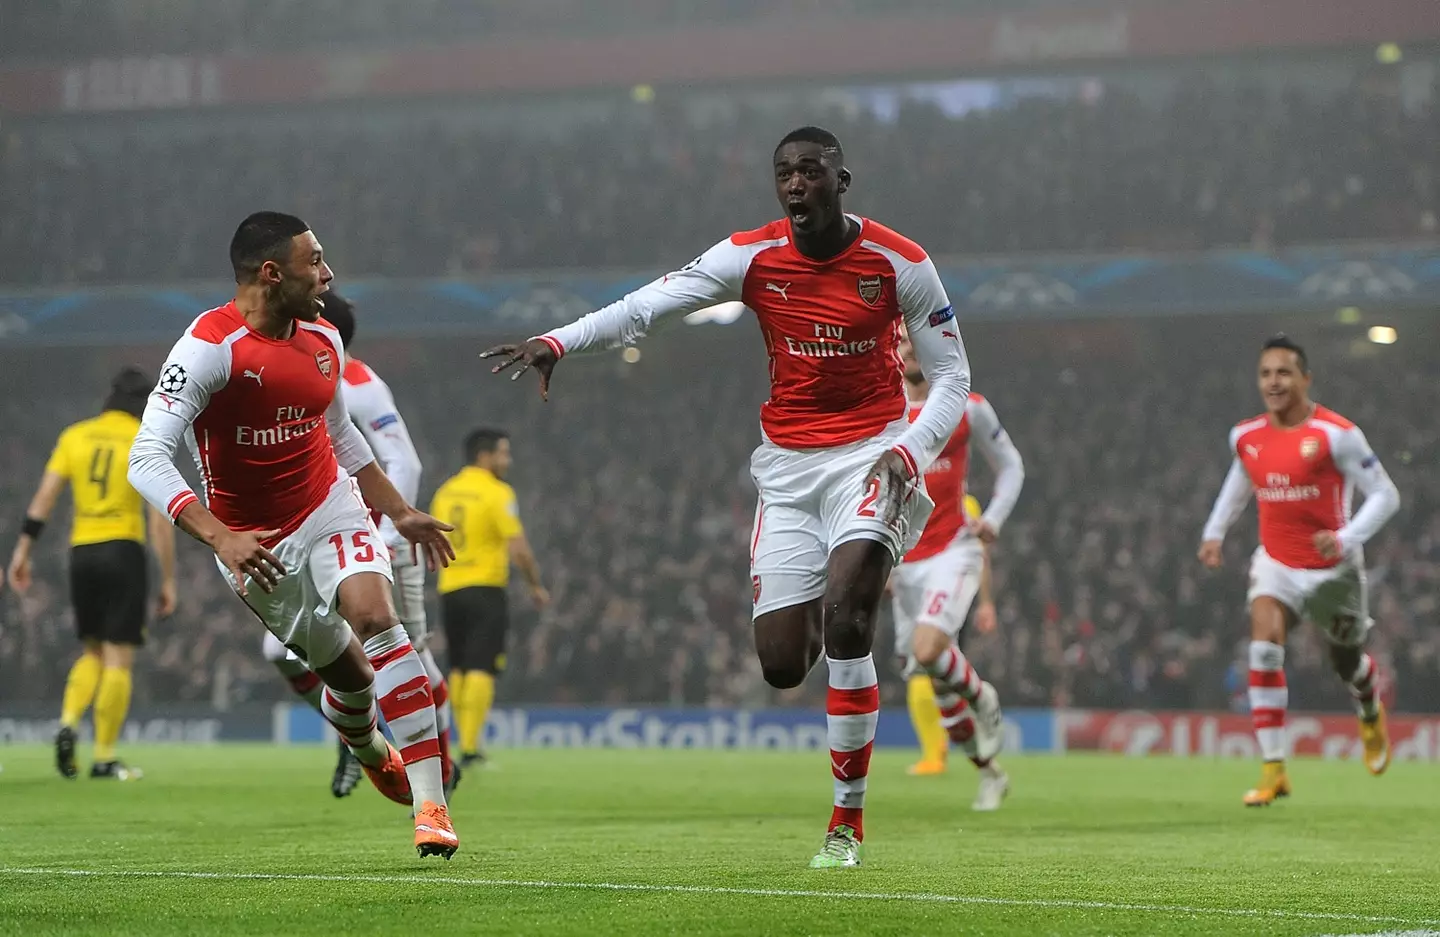 Sonogo scored one goal in his four years at Arsenal (Getty)